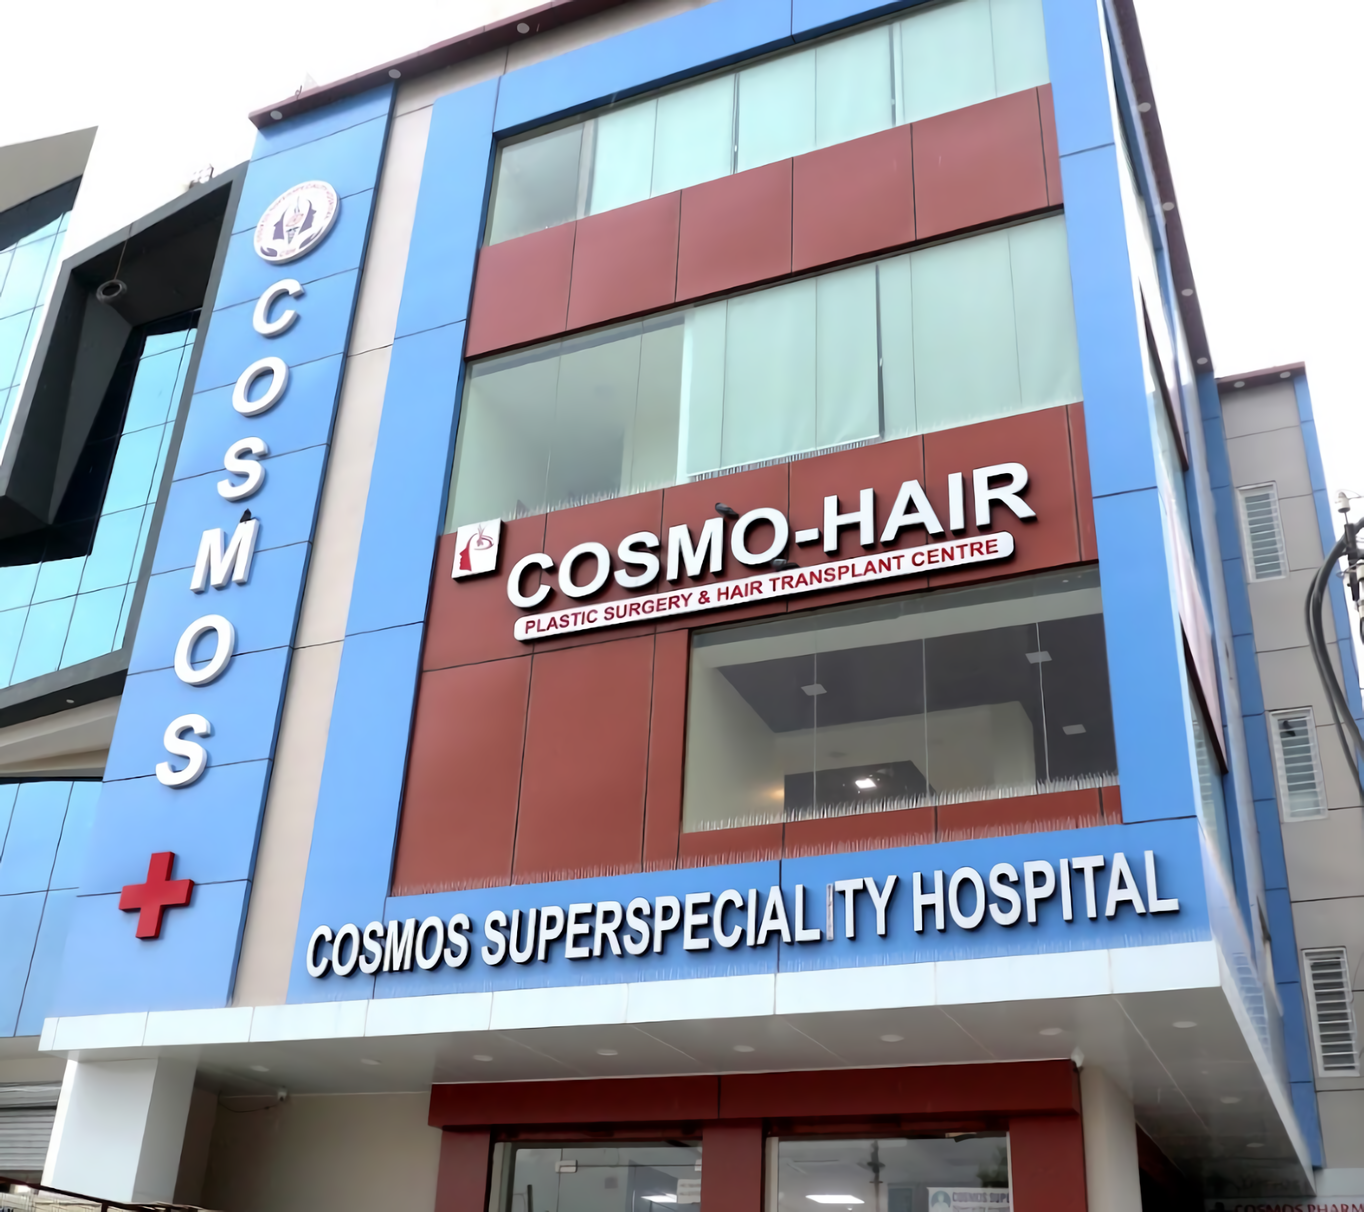 Cosmos Superspeciality Hospital